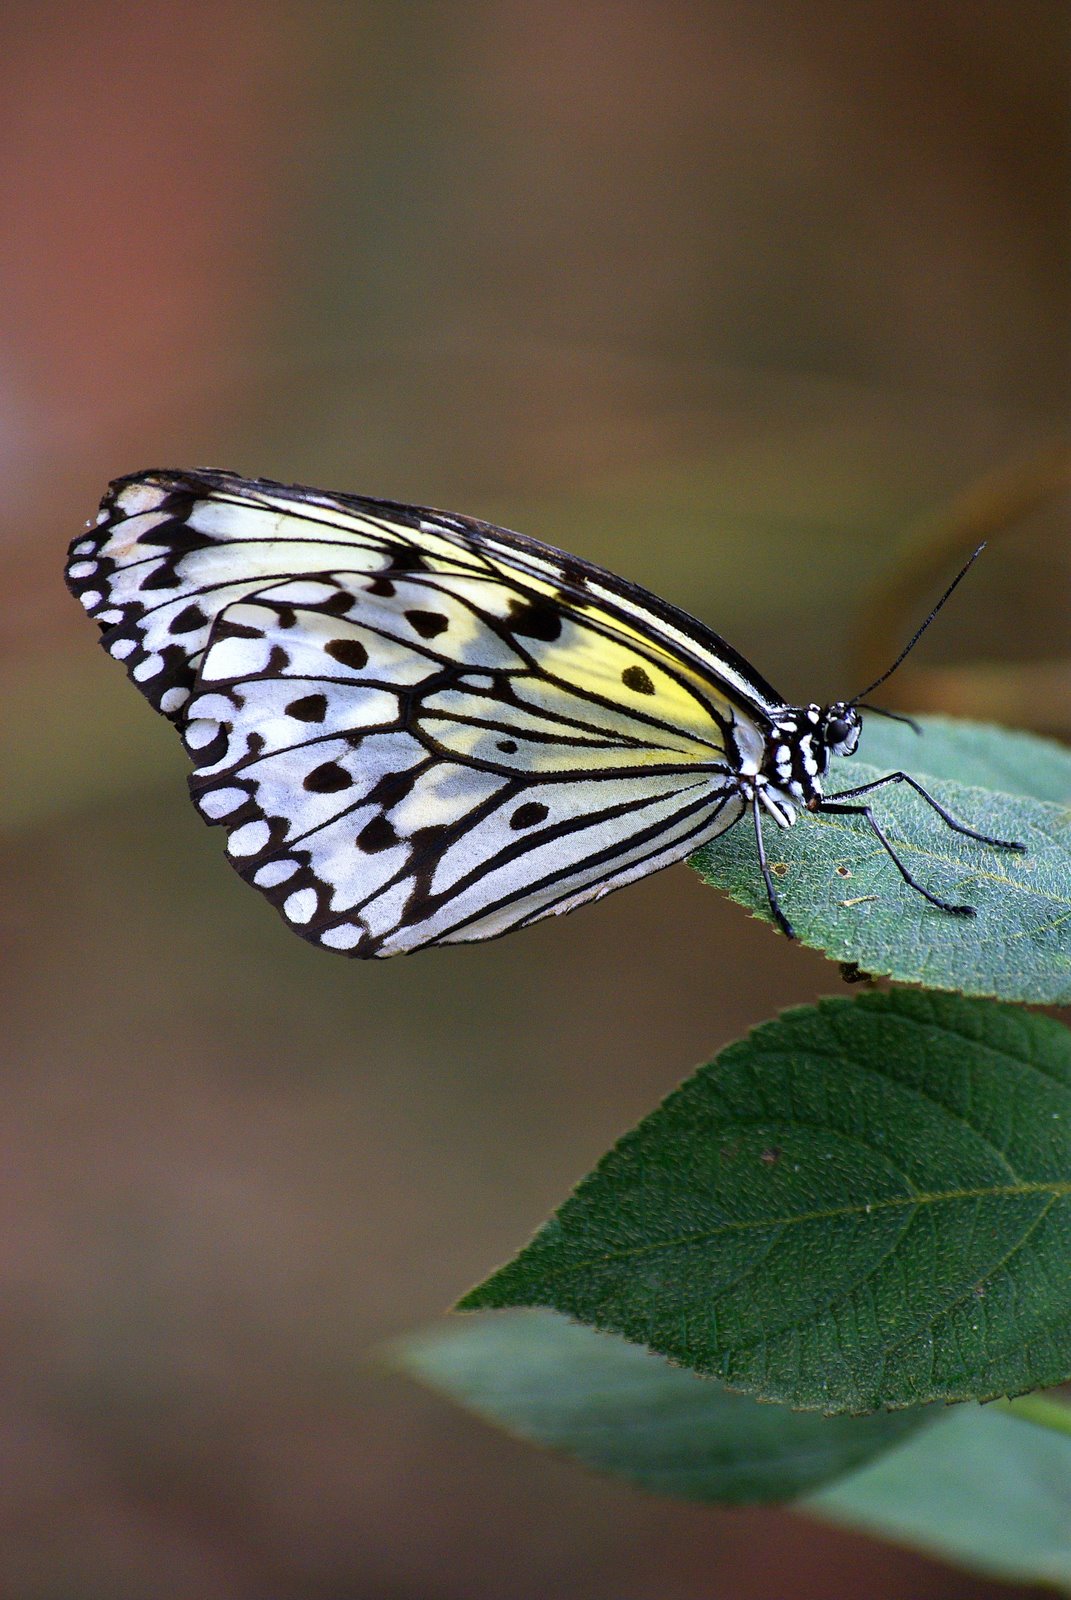 [light+colored+butterfly,+hi+quality,+large.jpg]